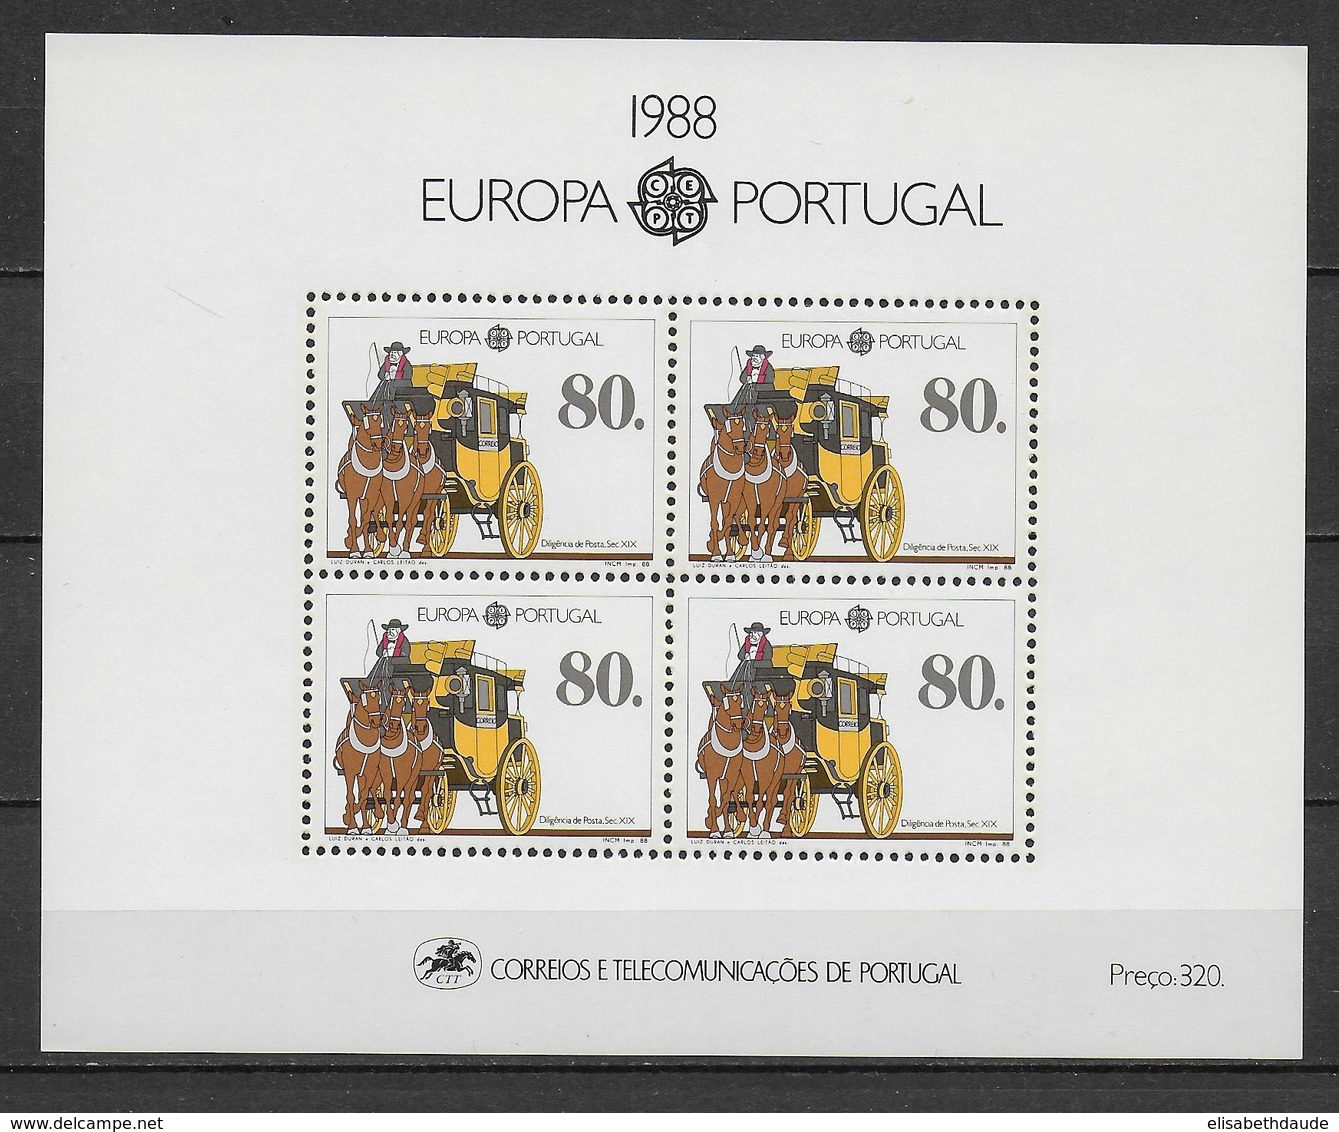 PORTUGAL  - EUROPA  1988 - BLOC N° 58 ** MNH - CHEVAUX / DILIGENCE - Hojas Bloque